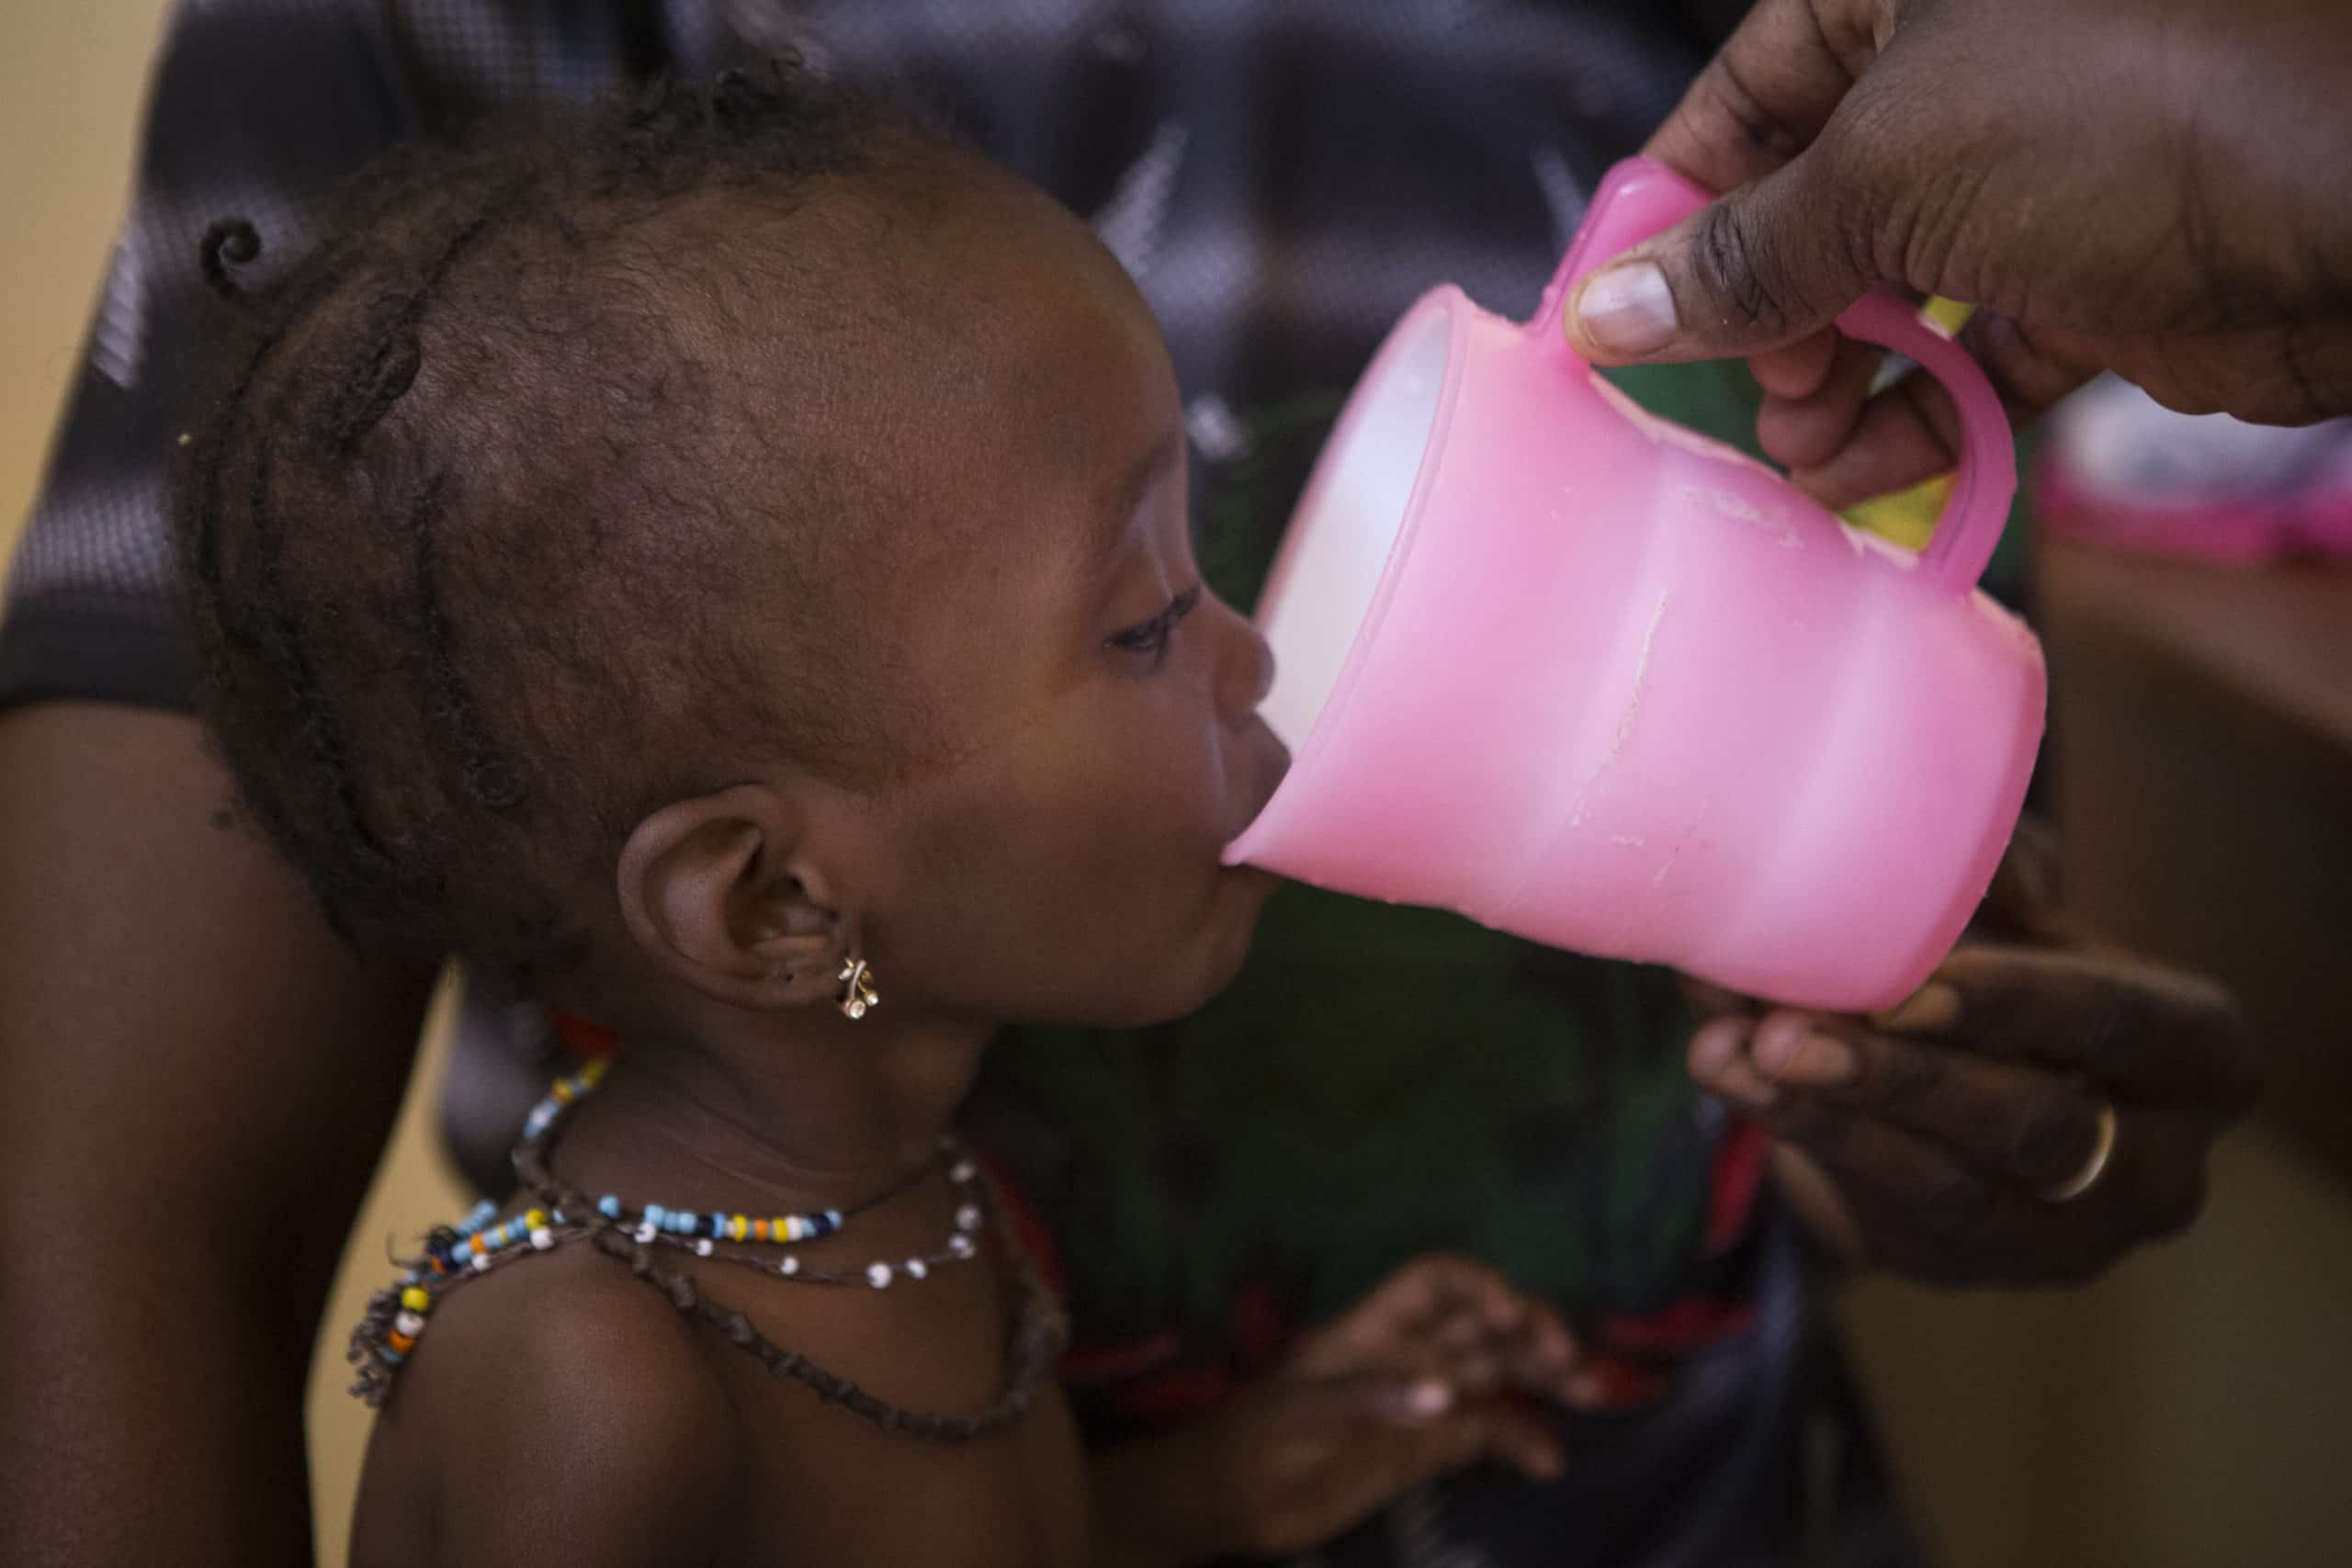 A black child drinking water from the pink cup that a black person is holding it